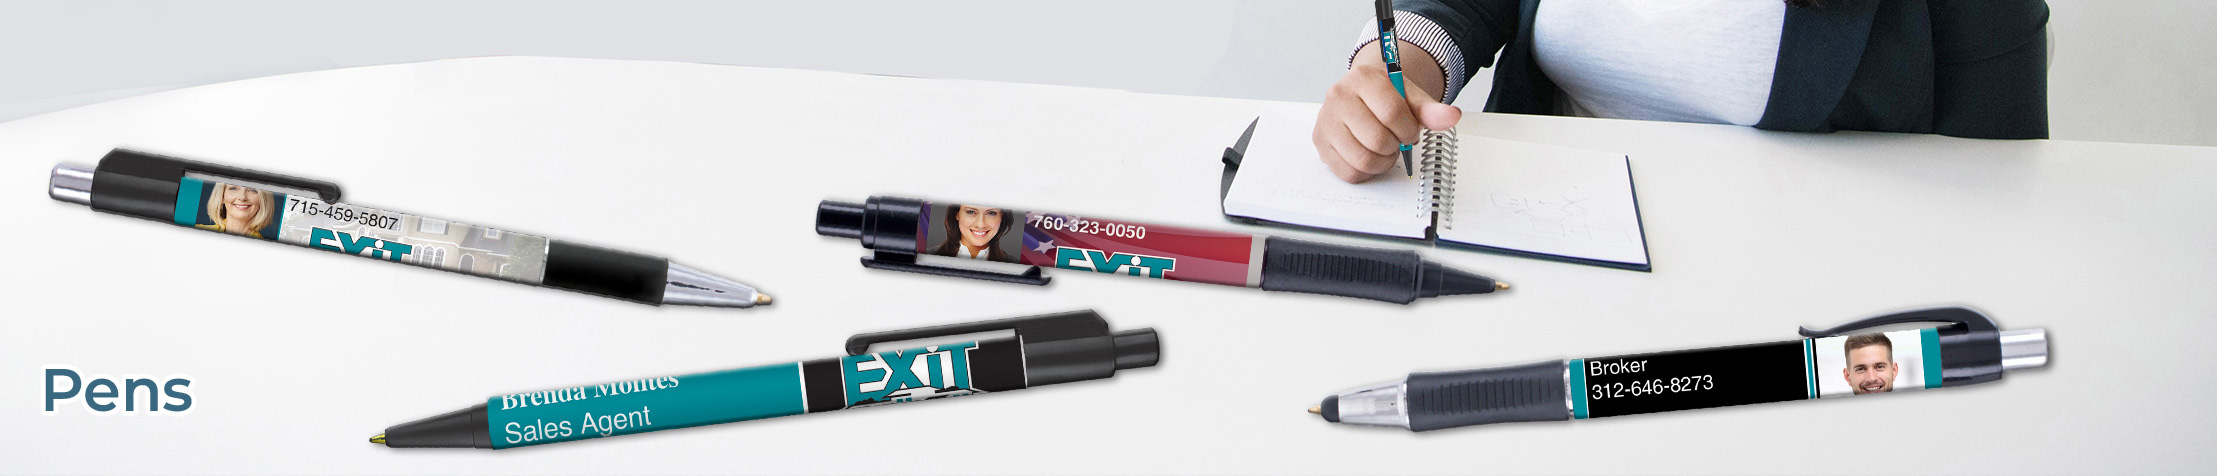 Exit Realty Real Estate Pens - Exit Realty approved vendor personalized realtor promotional products | BestPrintBuy.com